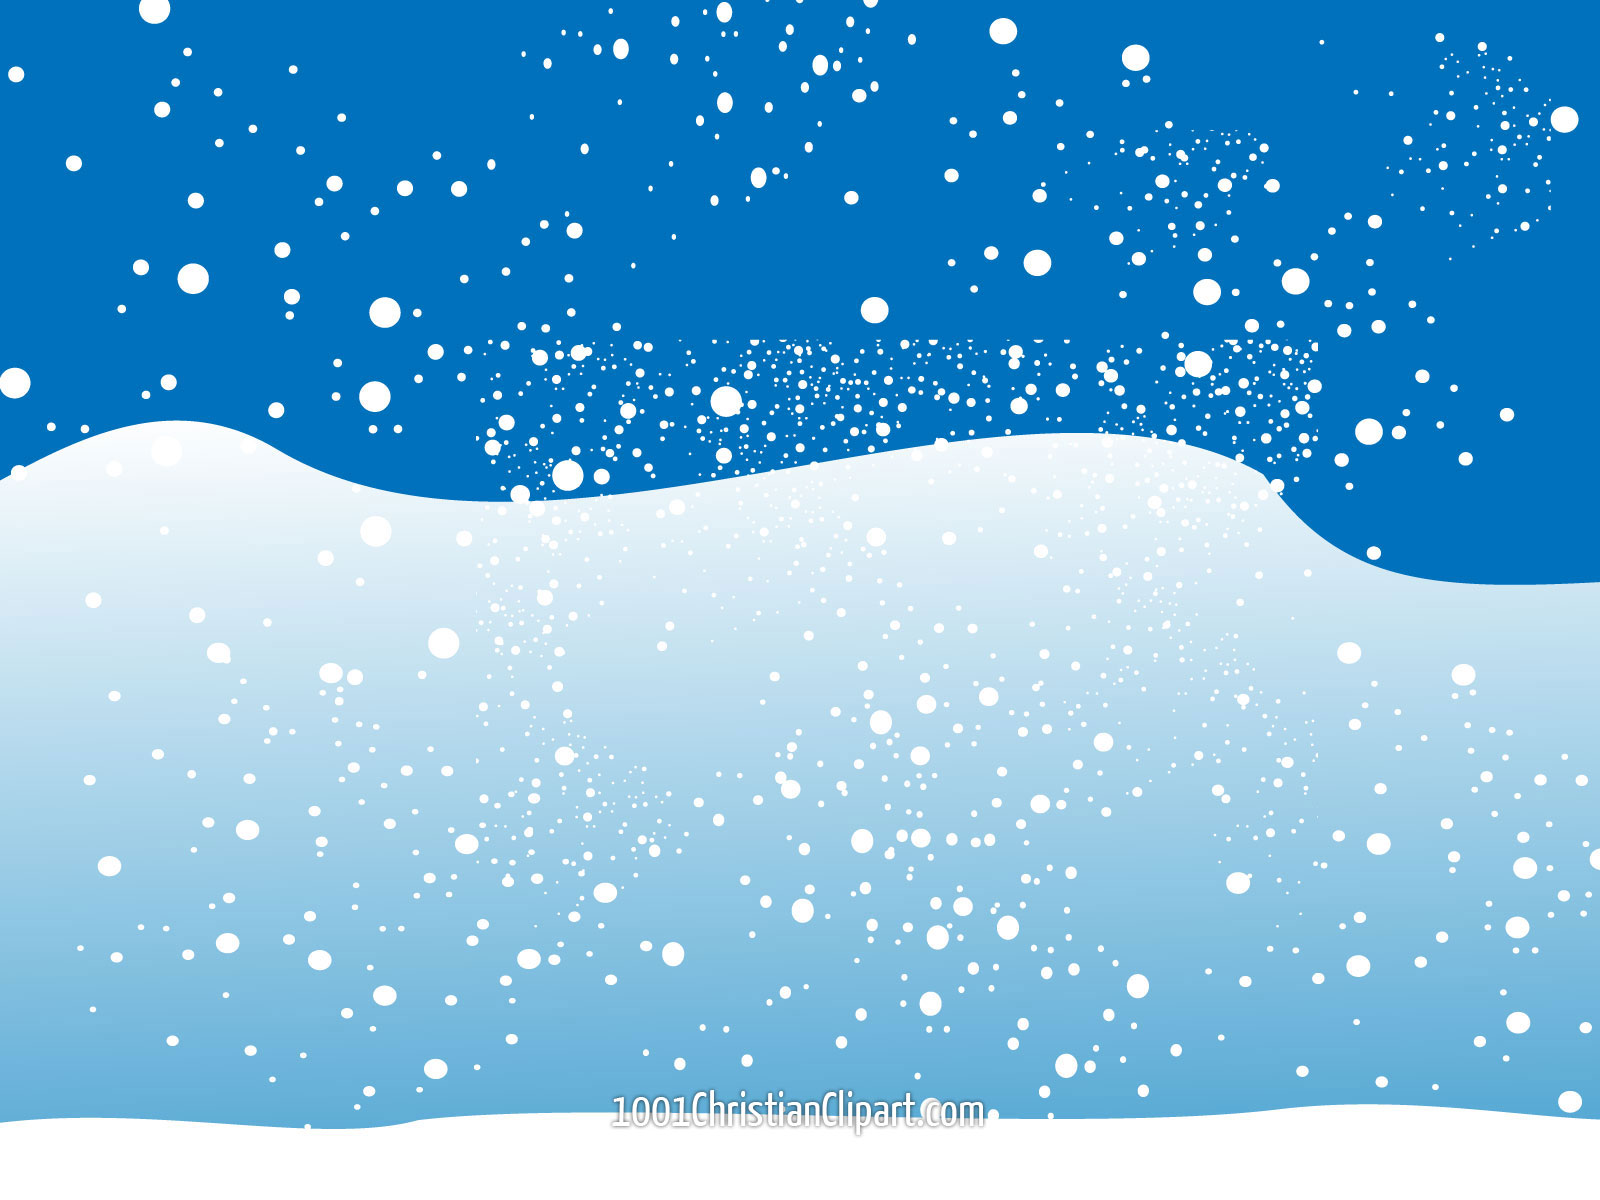 Christmas Snow theme, free download Powerpoint backgrounds and desktop 